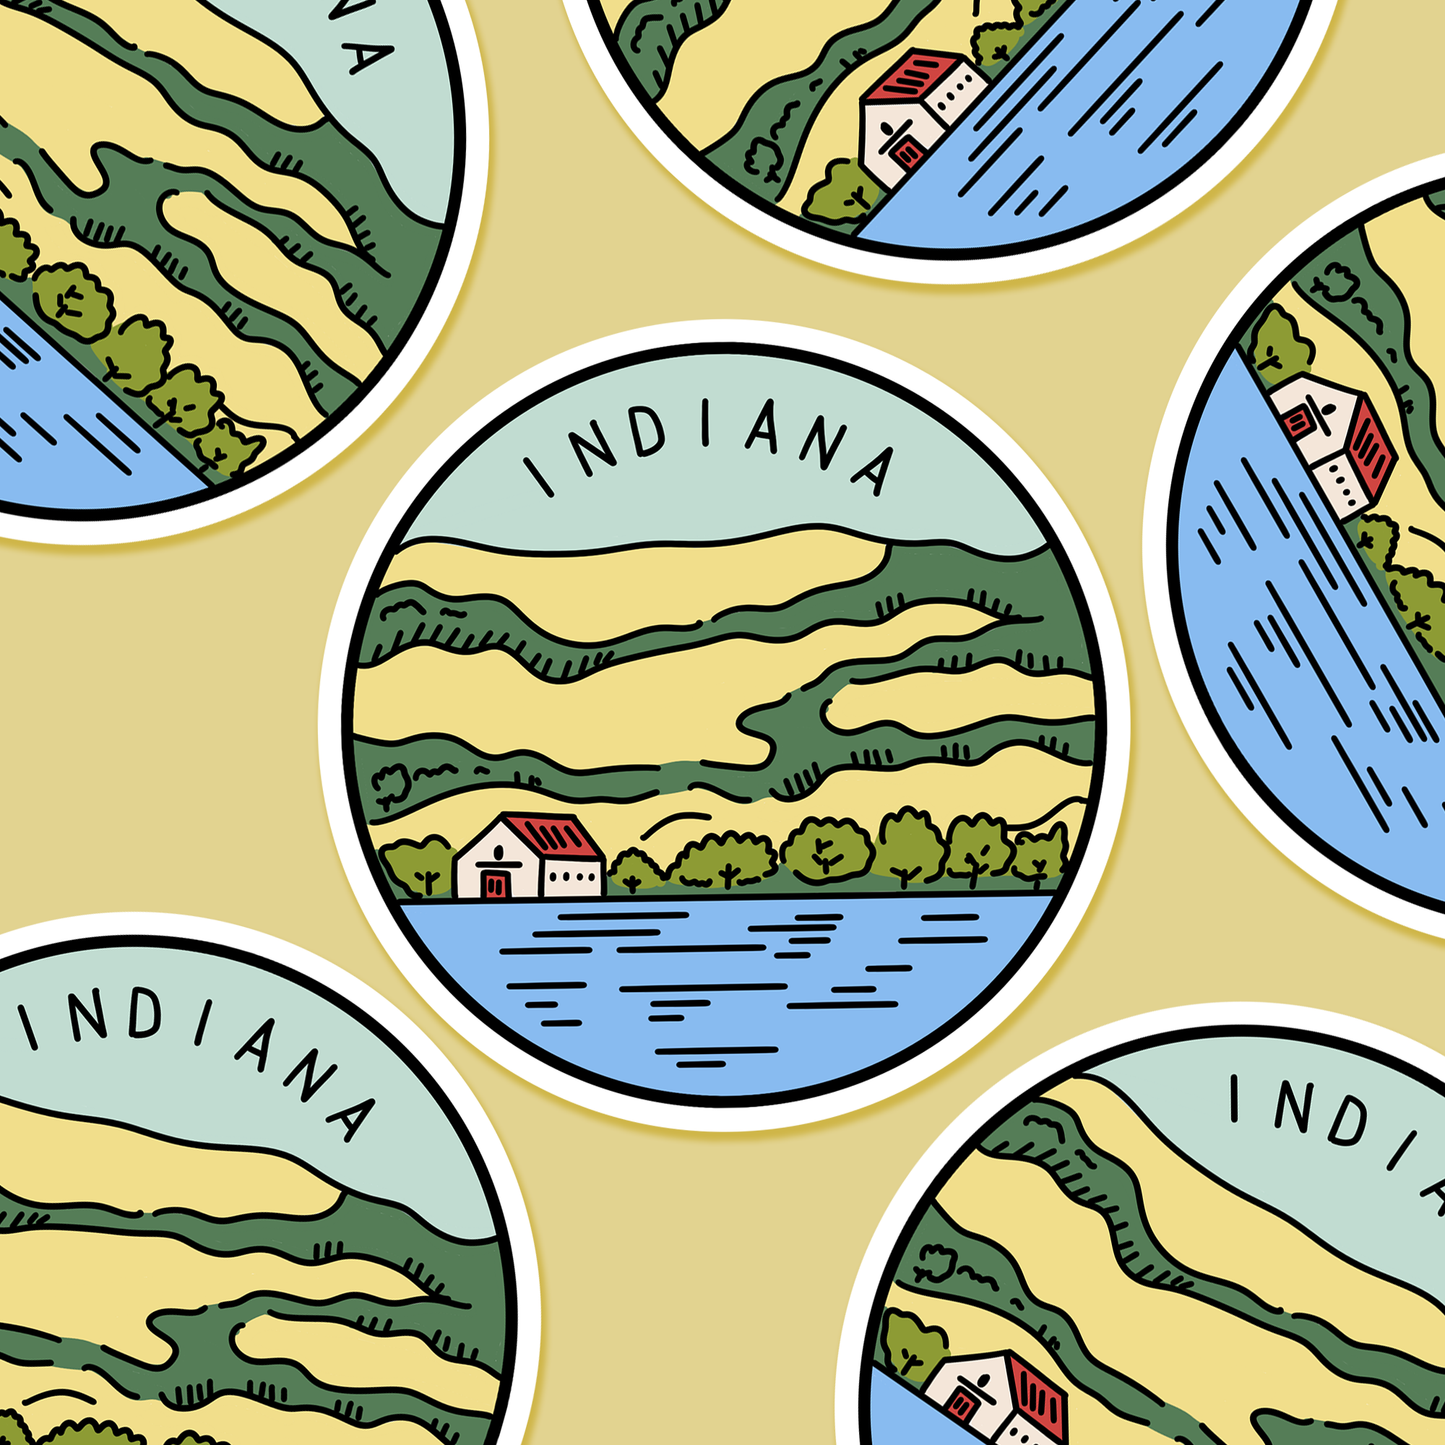 Indiana Illustrated US State 3 x 3 in - Travel Sticker